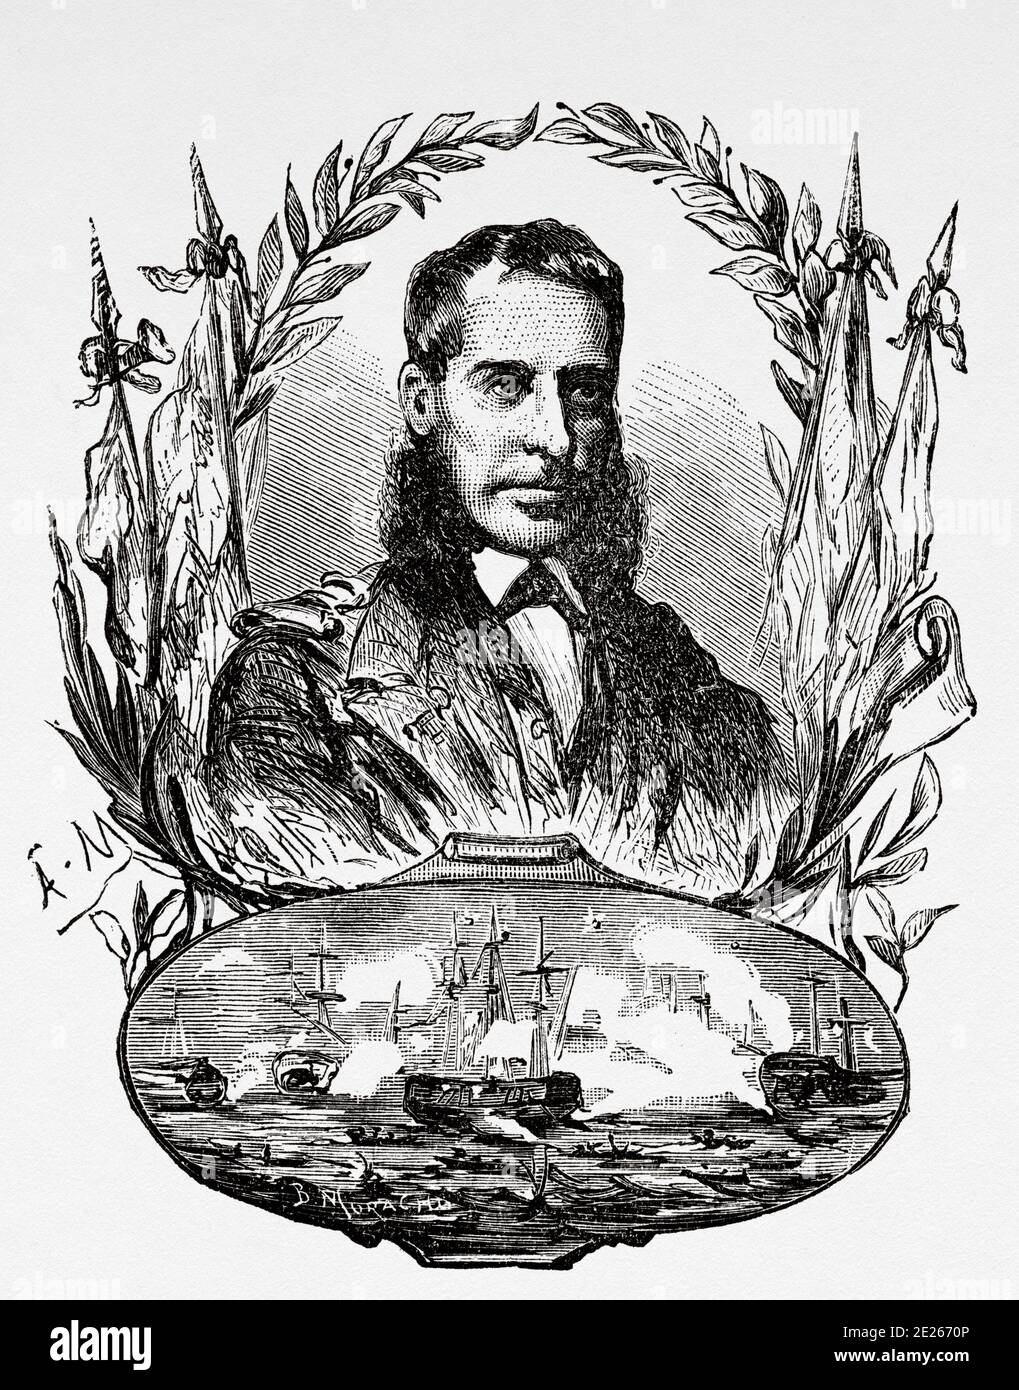 Portrait of Casto Méndez Núñez (Vigo 1824 - Pontevedra 1869). Spanish sailor and military, rear admiral of the Royal Spanish Navy. Combat of Callao. He completed in 1867 the first round the world of an armored frigate, the Numancia ship. Old engraving of the book Spanish Biographical Year by Ildefonso Fernandez 1899 Stock Photo